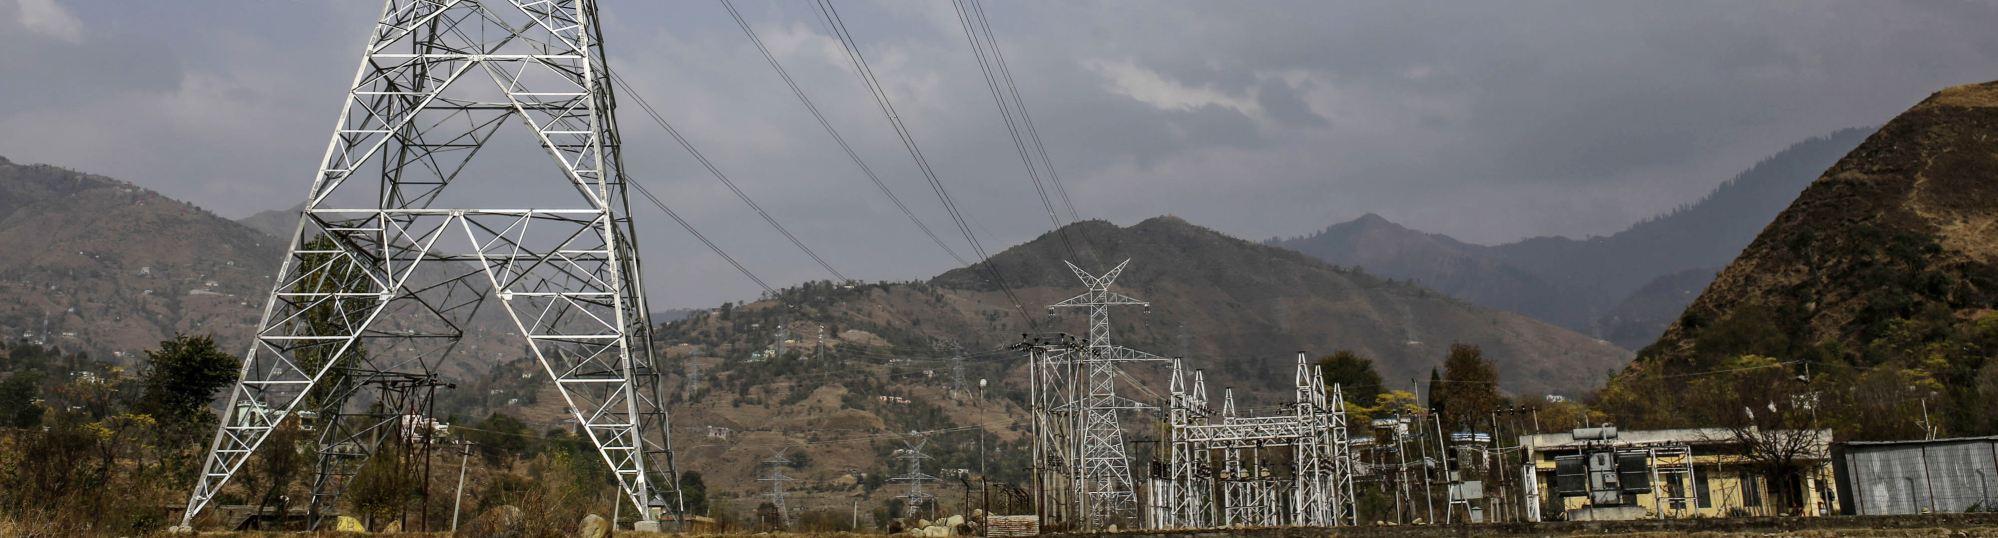 Electric towers stand in Rajouri district.